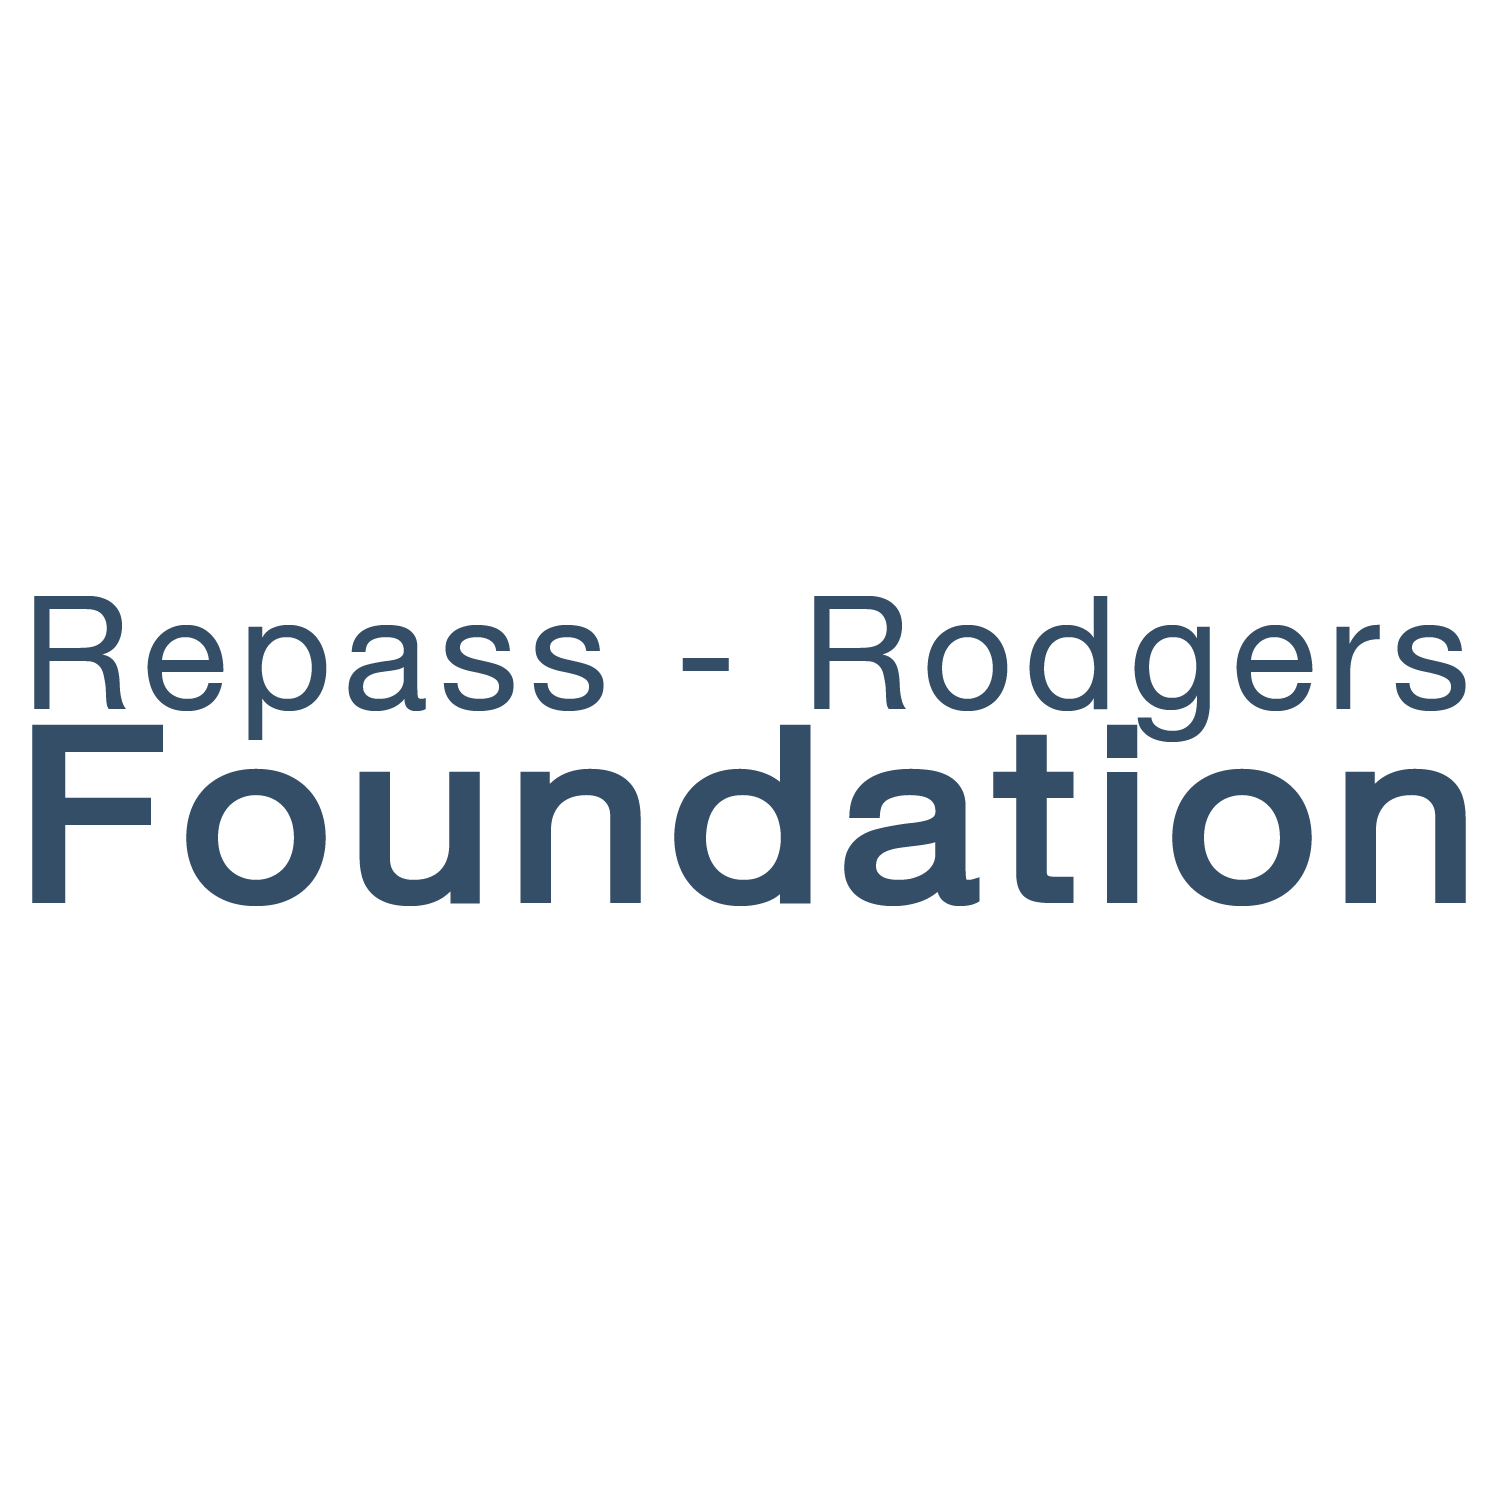 Repass-Rodgers Foundation_logo.png